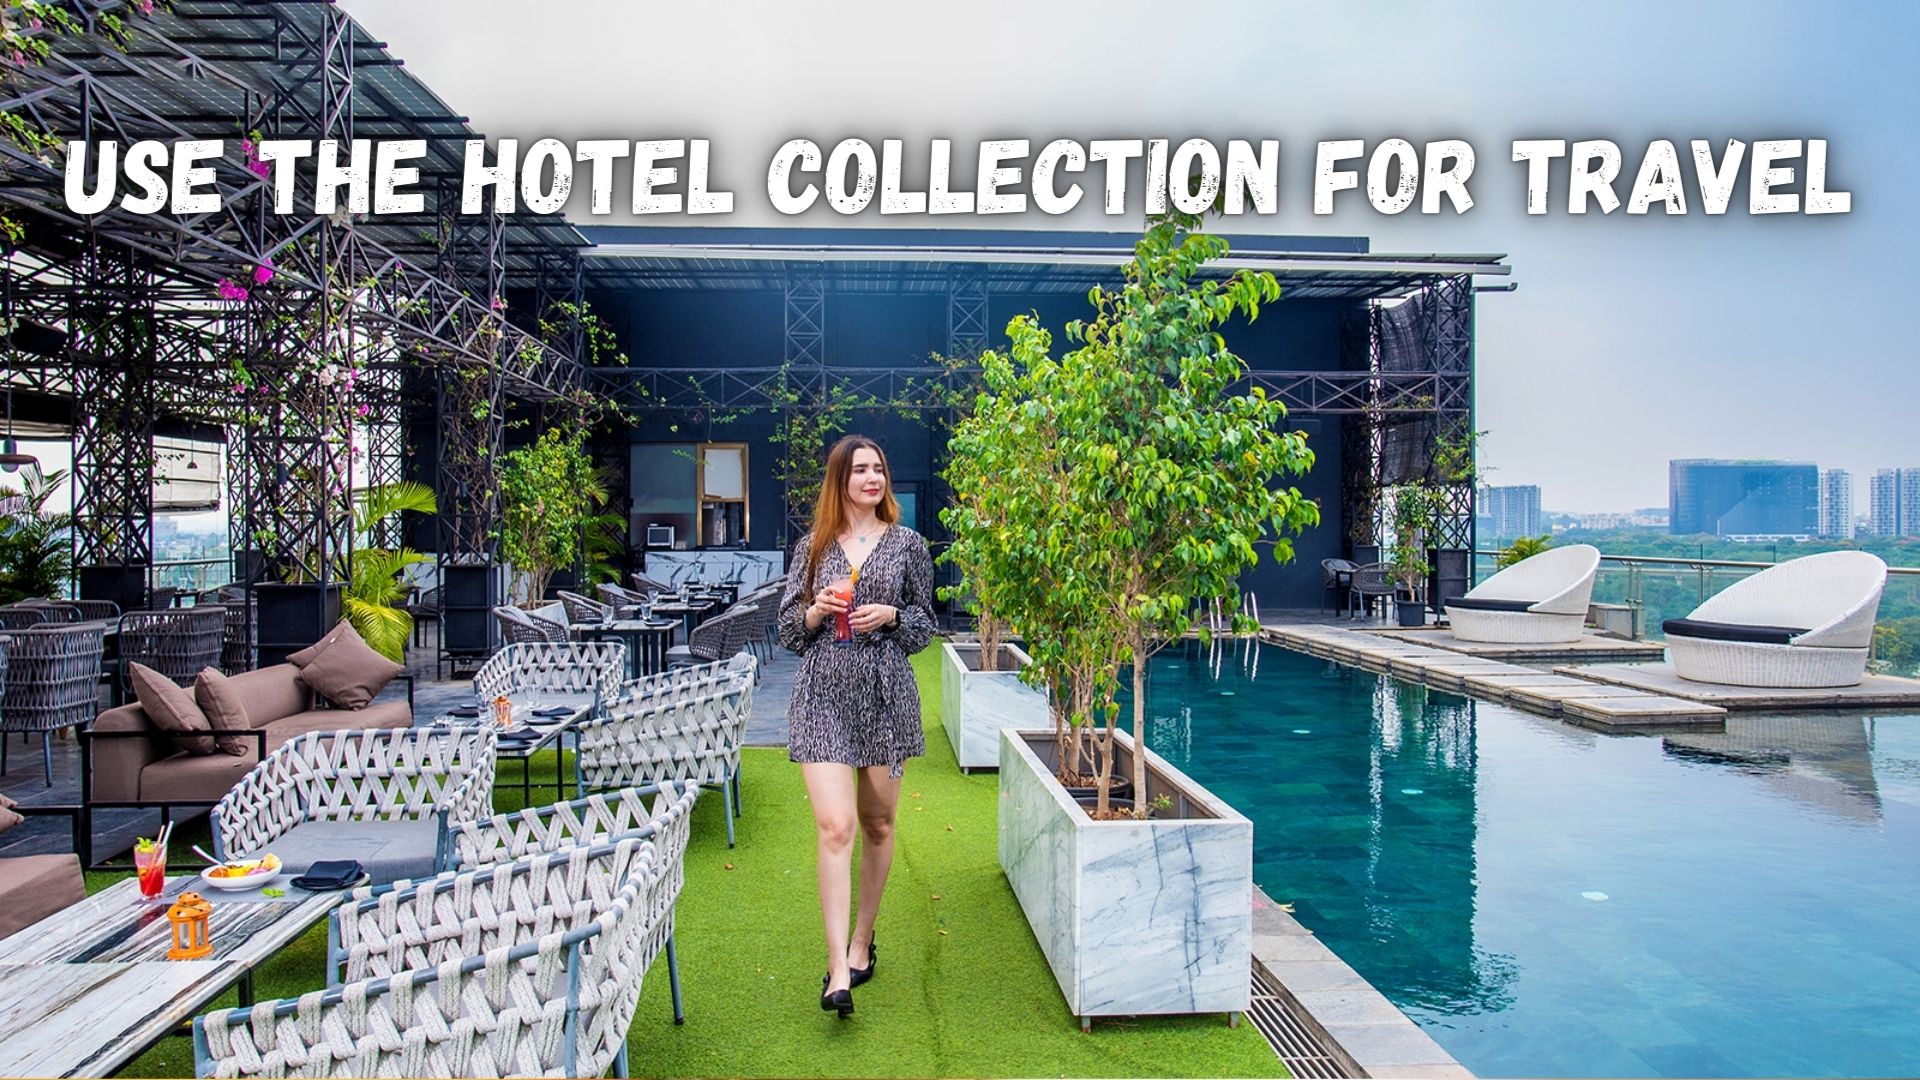 Use the Hotel Collection for Travel.